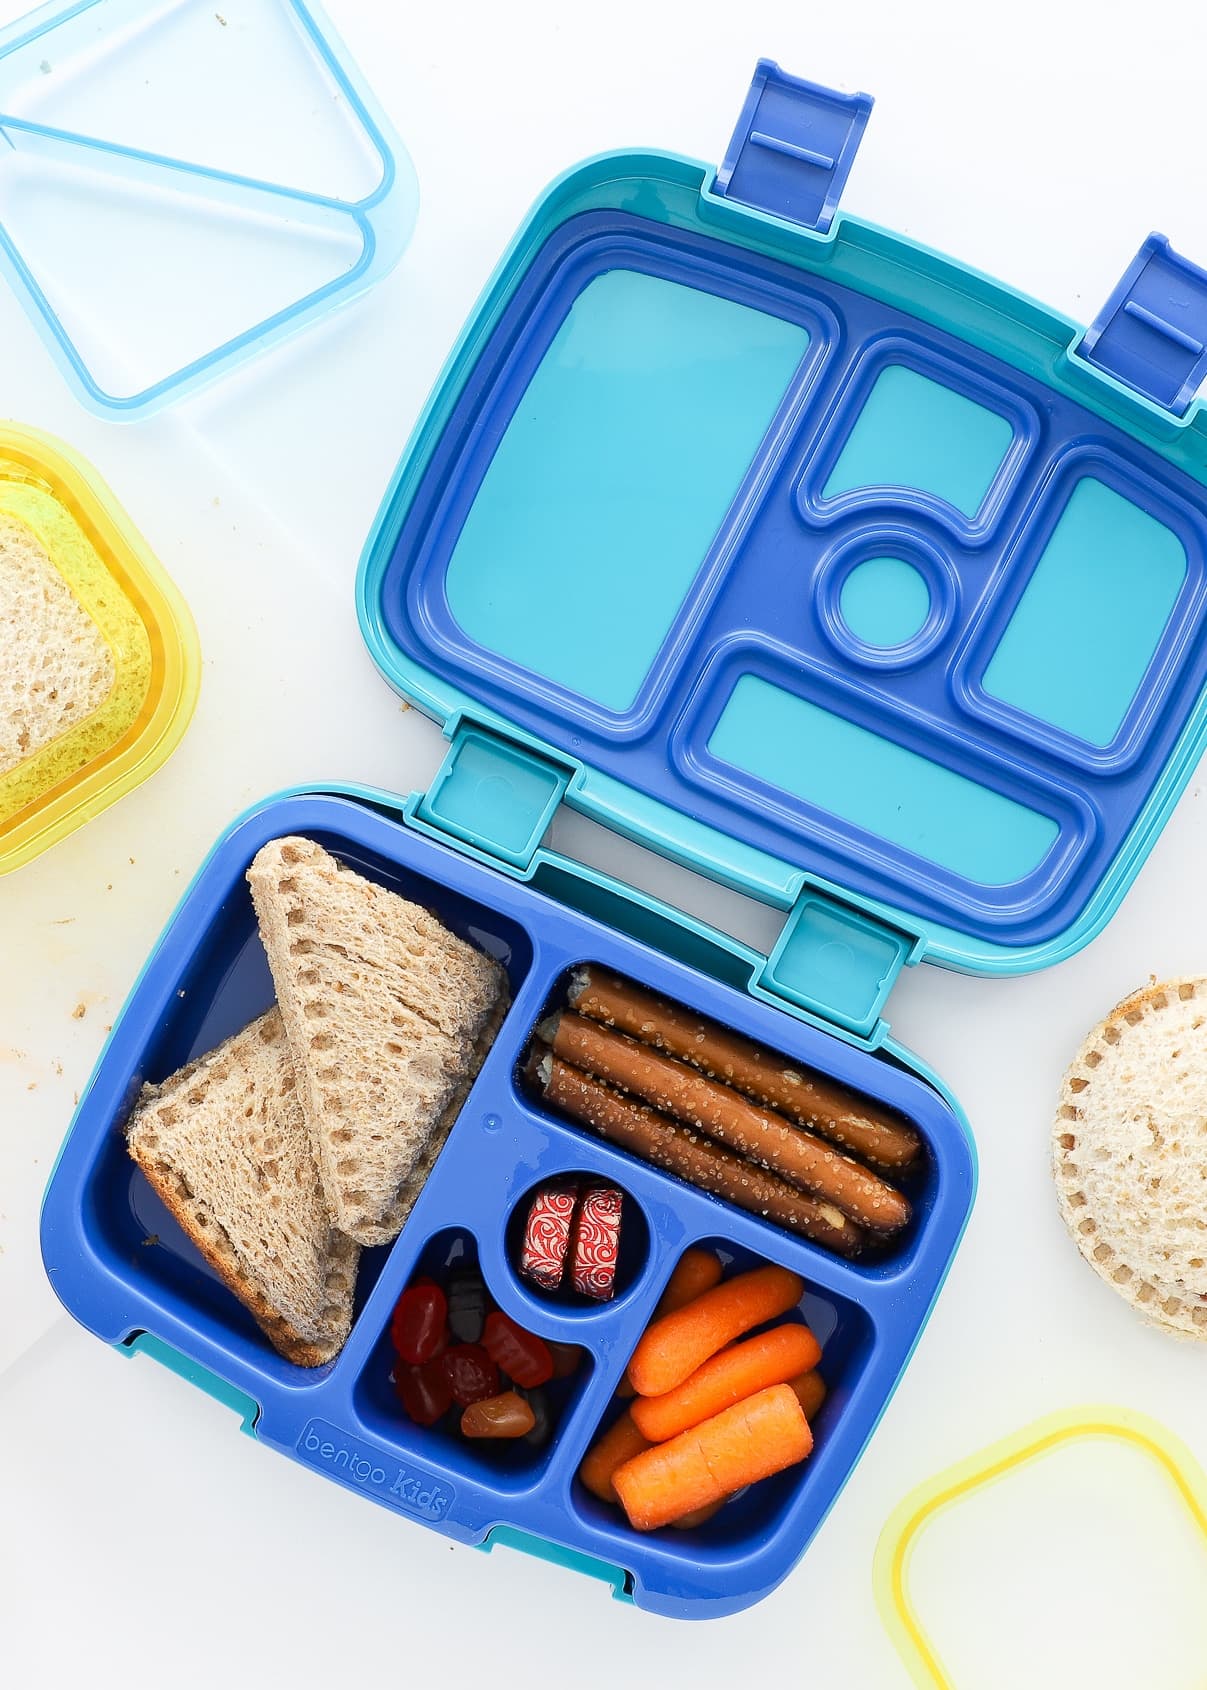 https://thehomesihavemade.com/wp-content/uploads/2021/09/Lunch-Packing-Tips-for-School_11.jpg